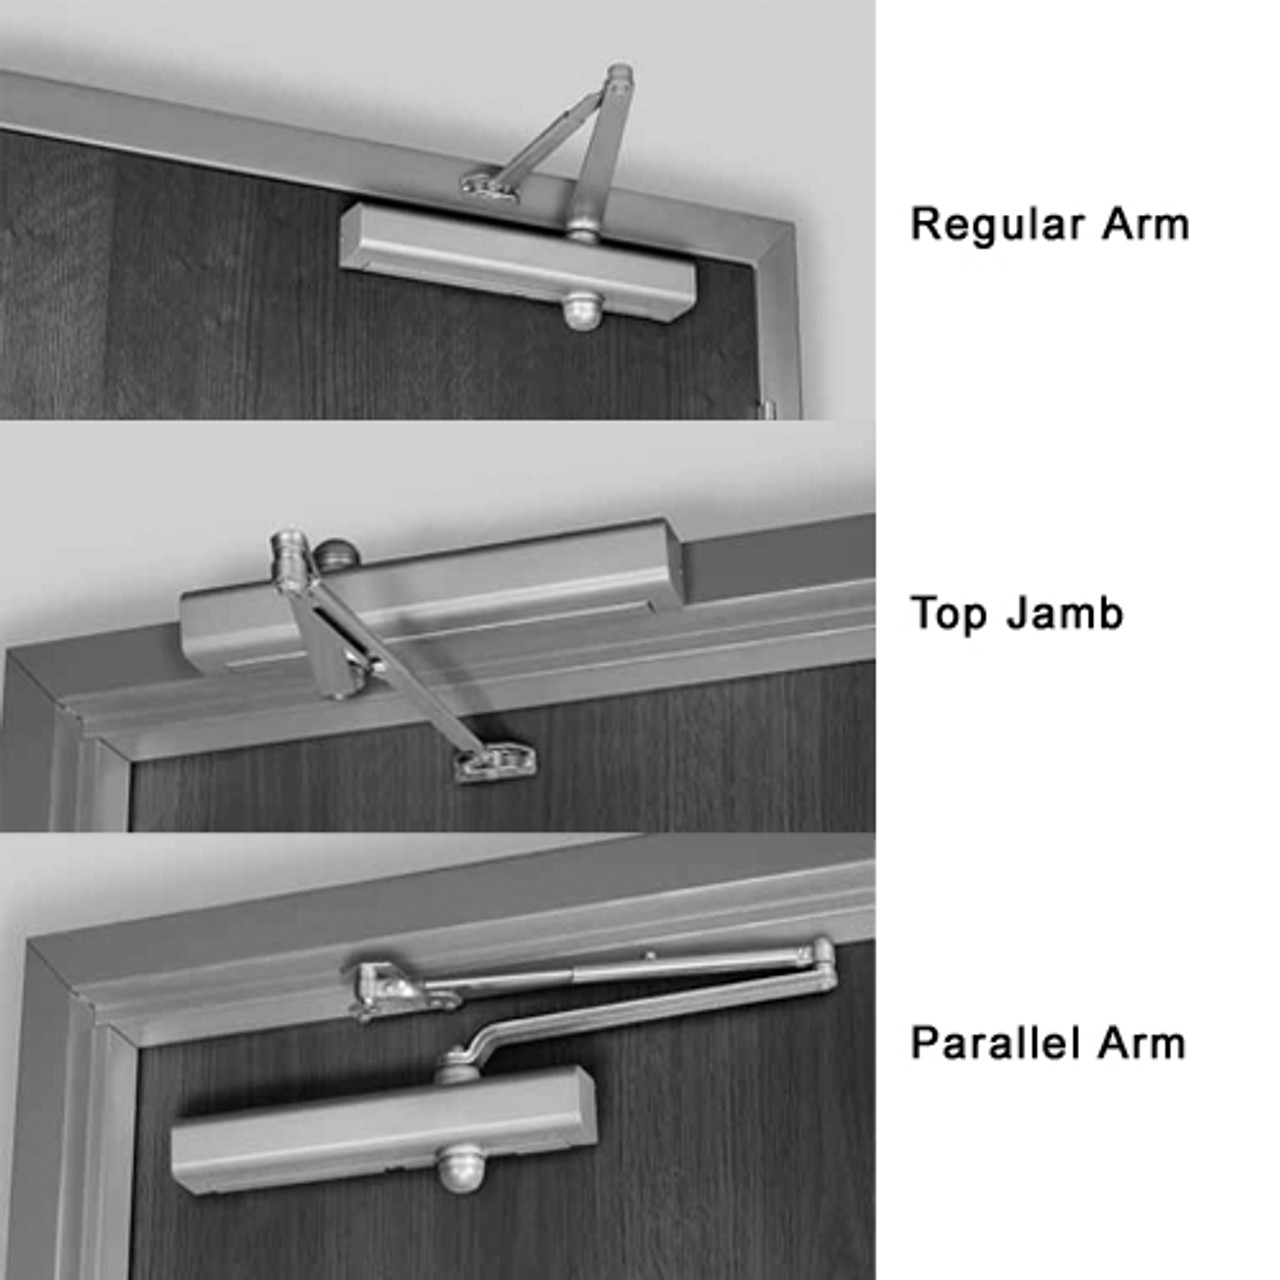 8501HM-693 Norton 8000 Series Full Cover Hold Open Door Closers with Regular Parallel and Top Jamb to 2-3/4 inch Reveal in Black Finish